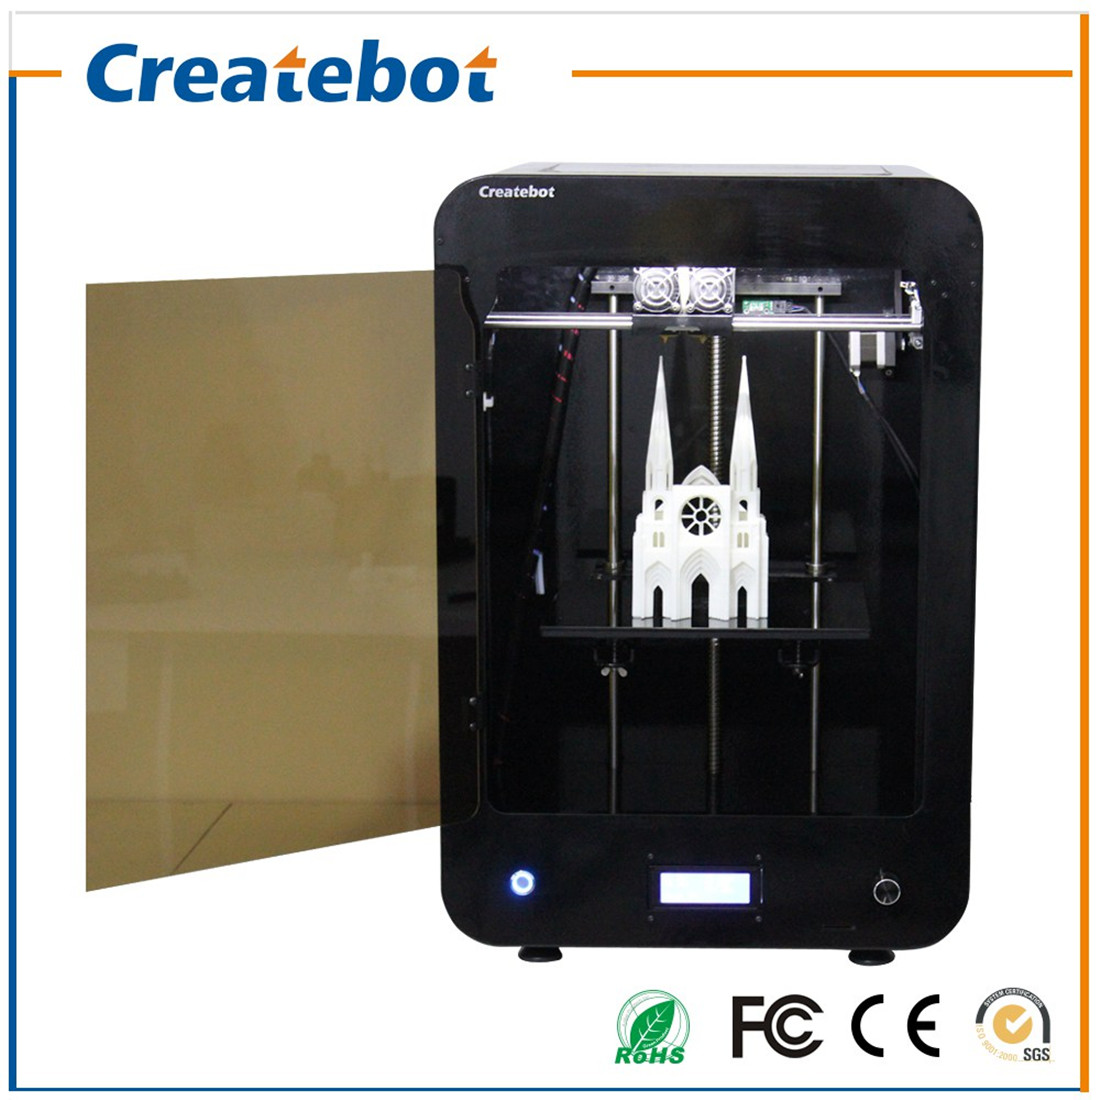  One of the several CreateBot 3D printer models 